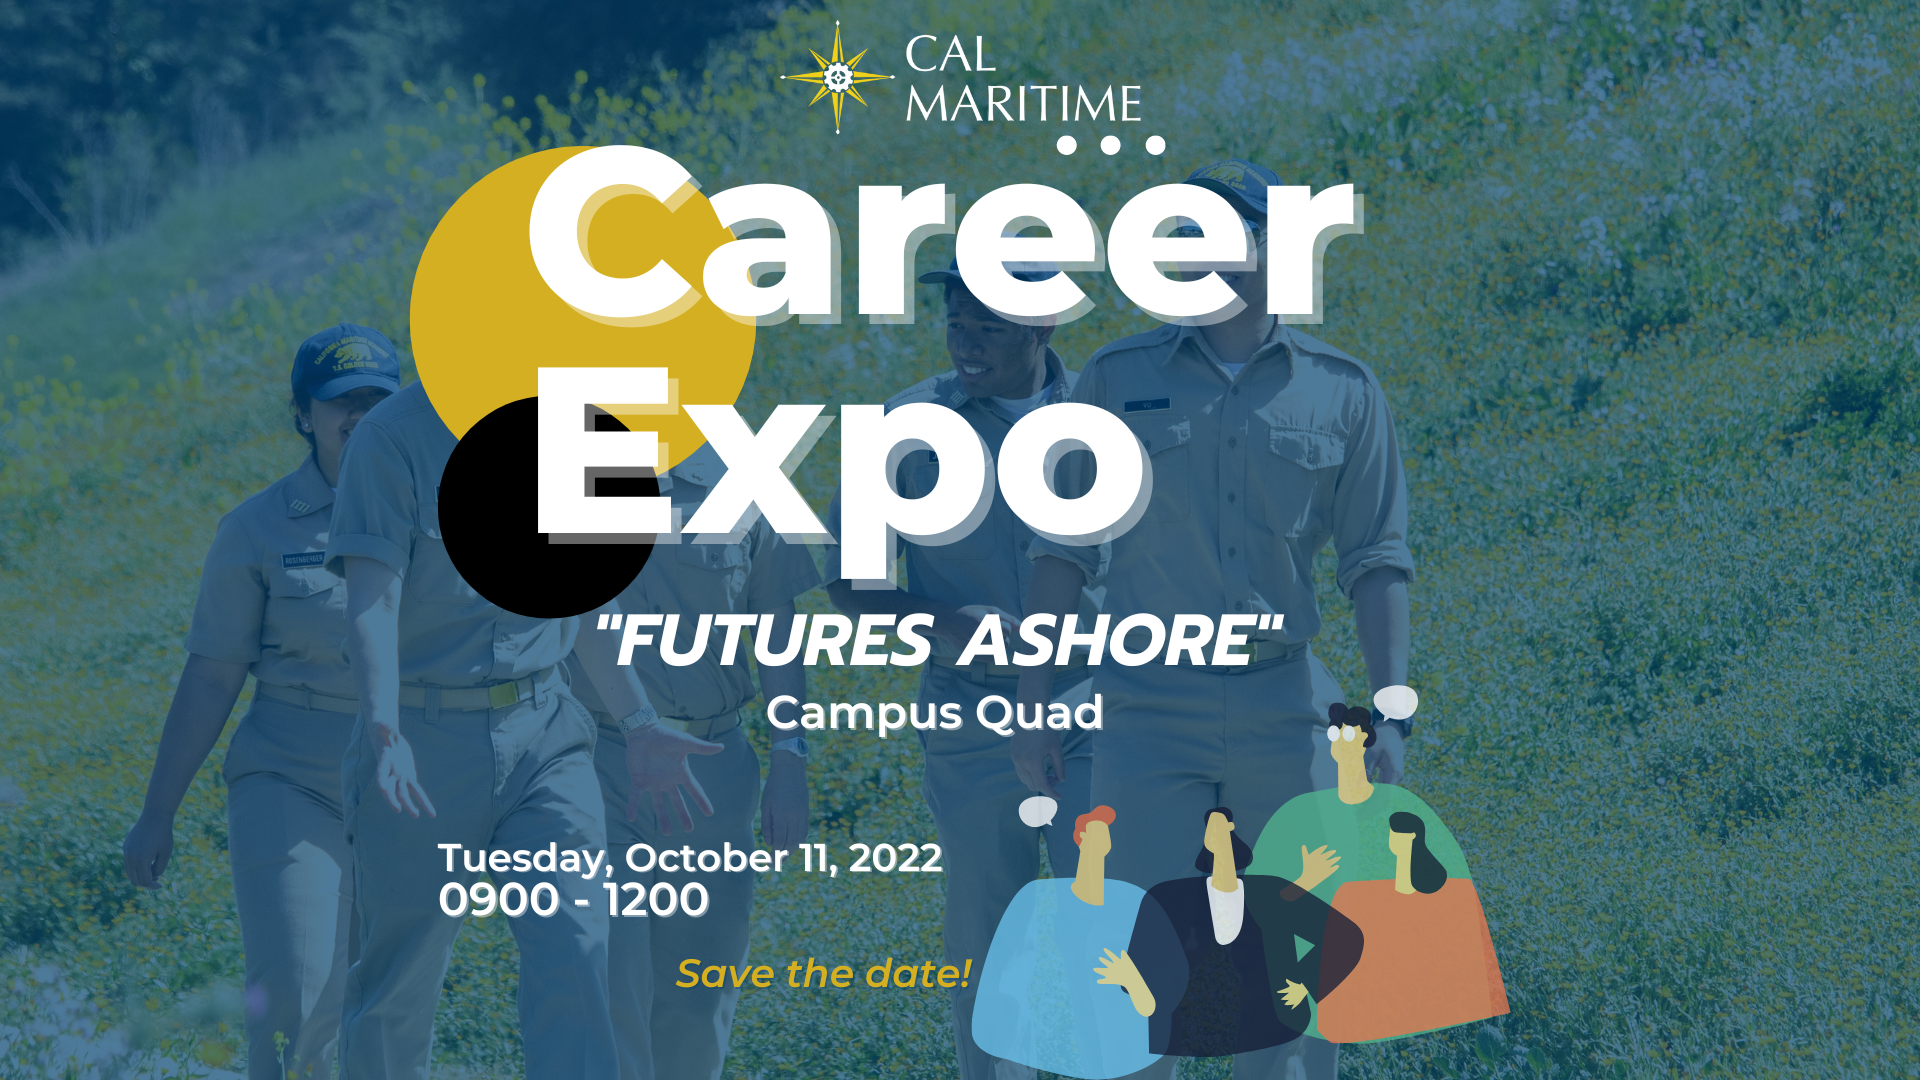 Career Expo "Futures Ashore" on the Campus Quad of CSU Maritime Academy, 10/11/22, 9 AM to 12 N